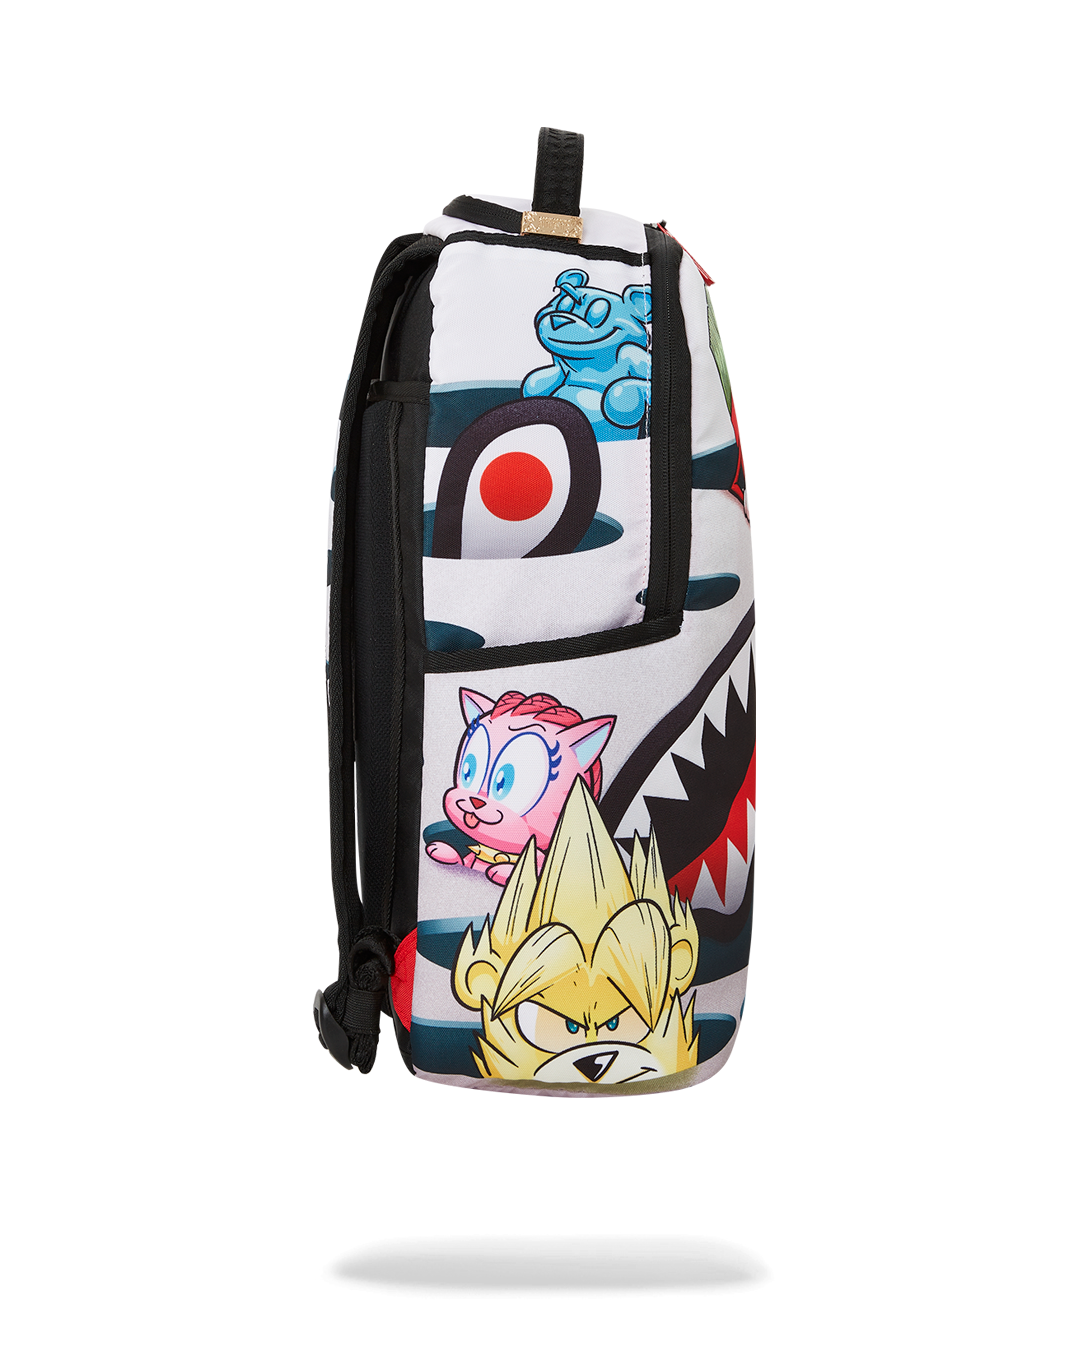 SPRAYGROUND® BACKPACK CAN'T CATCH ME BACKPACK